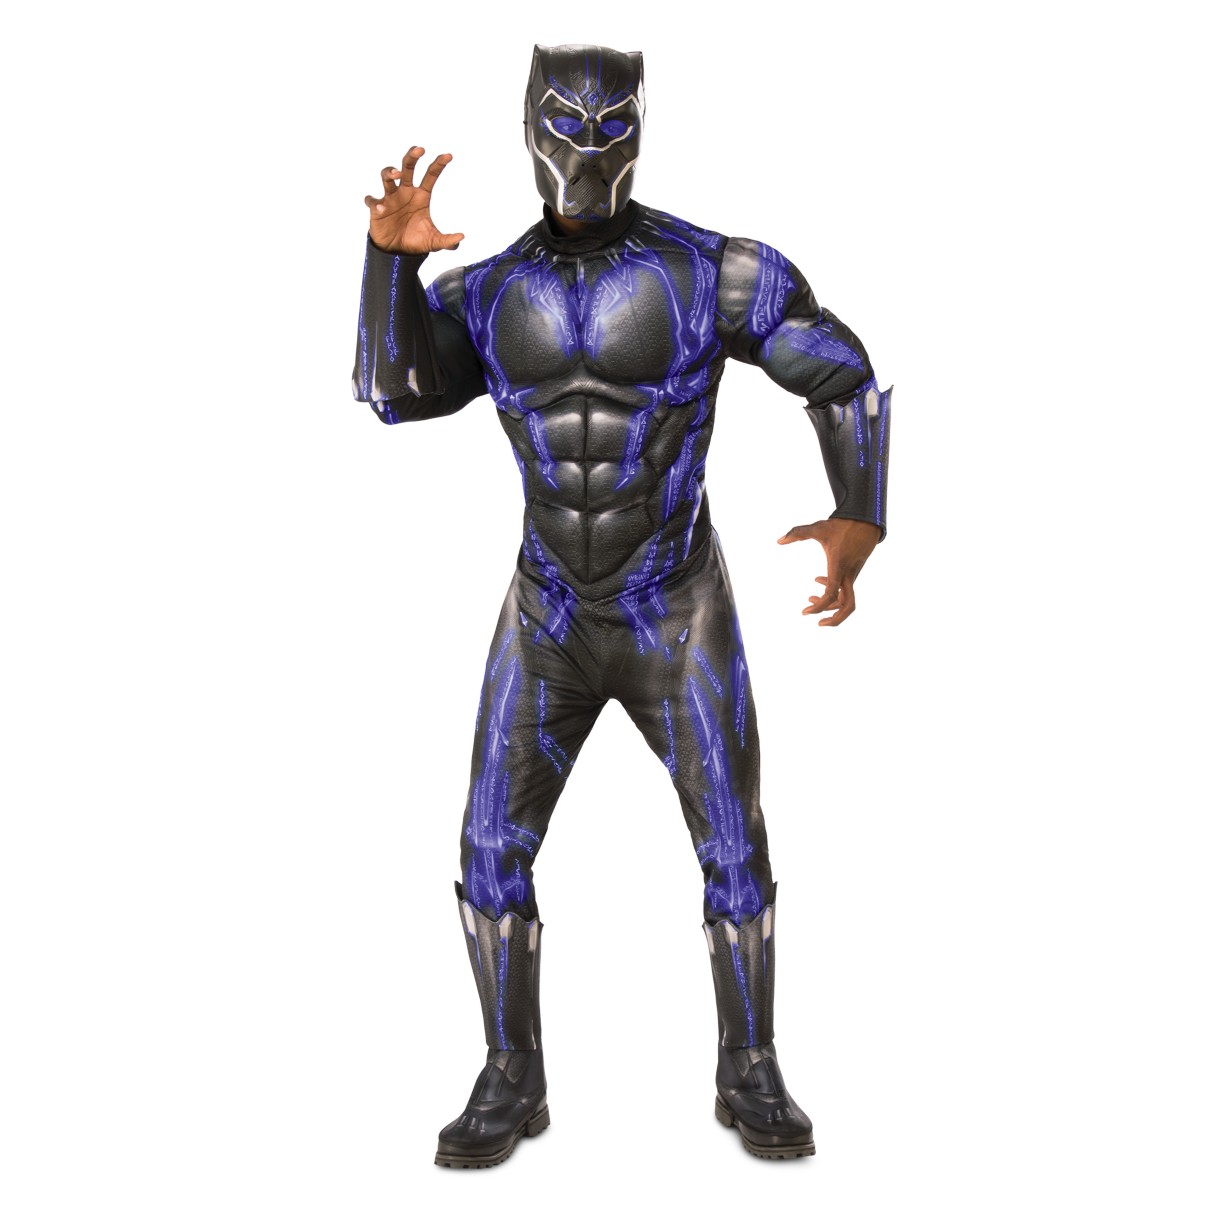 Black Panther Deluxe Costume for Adults by Rubie's